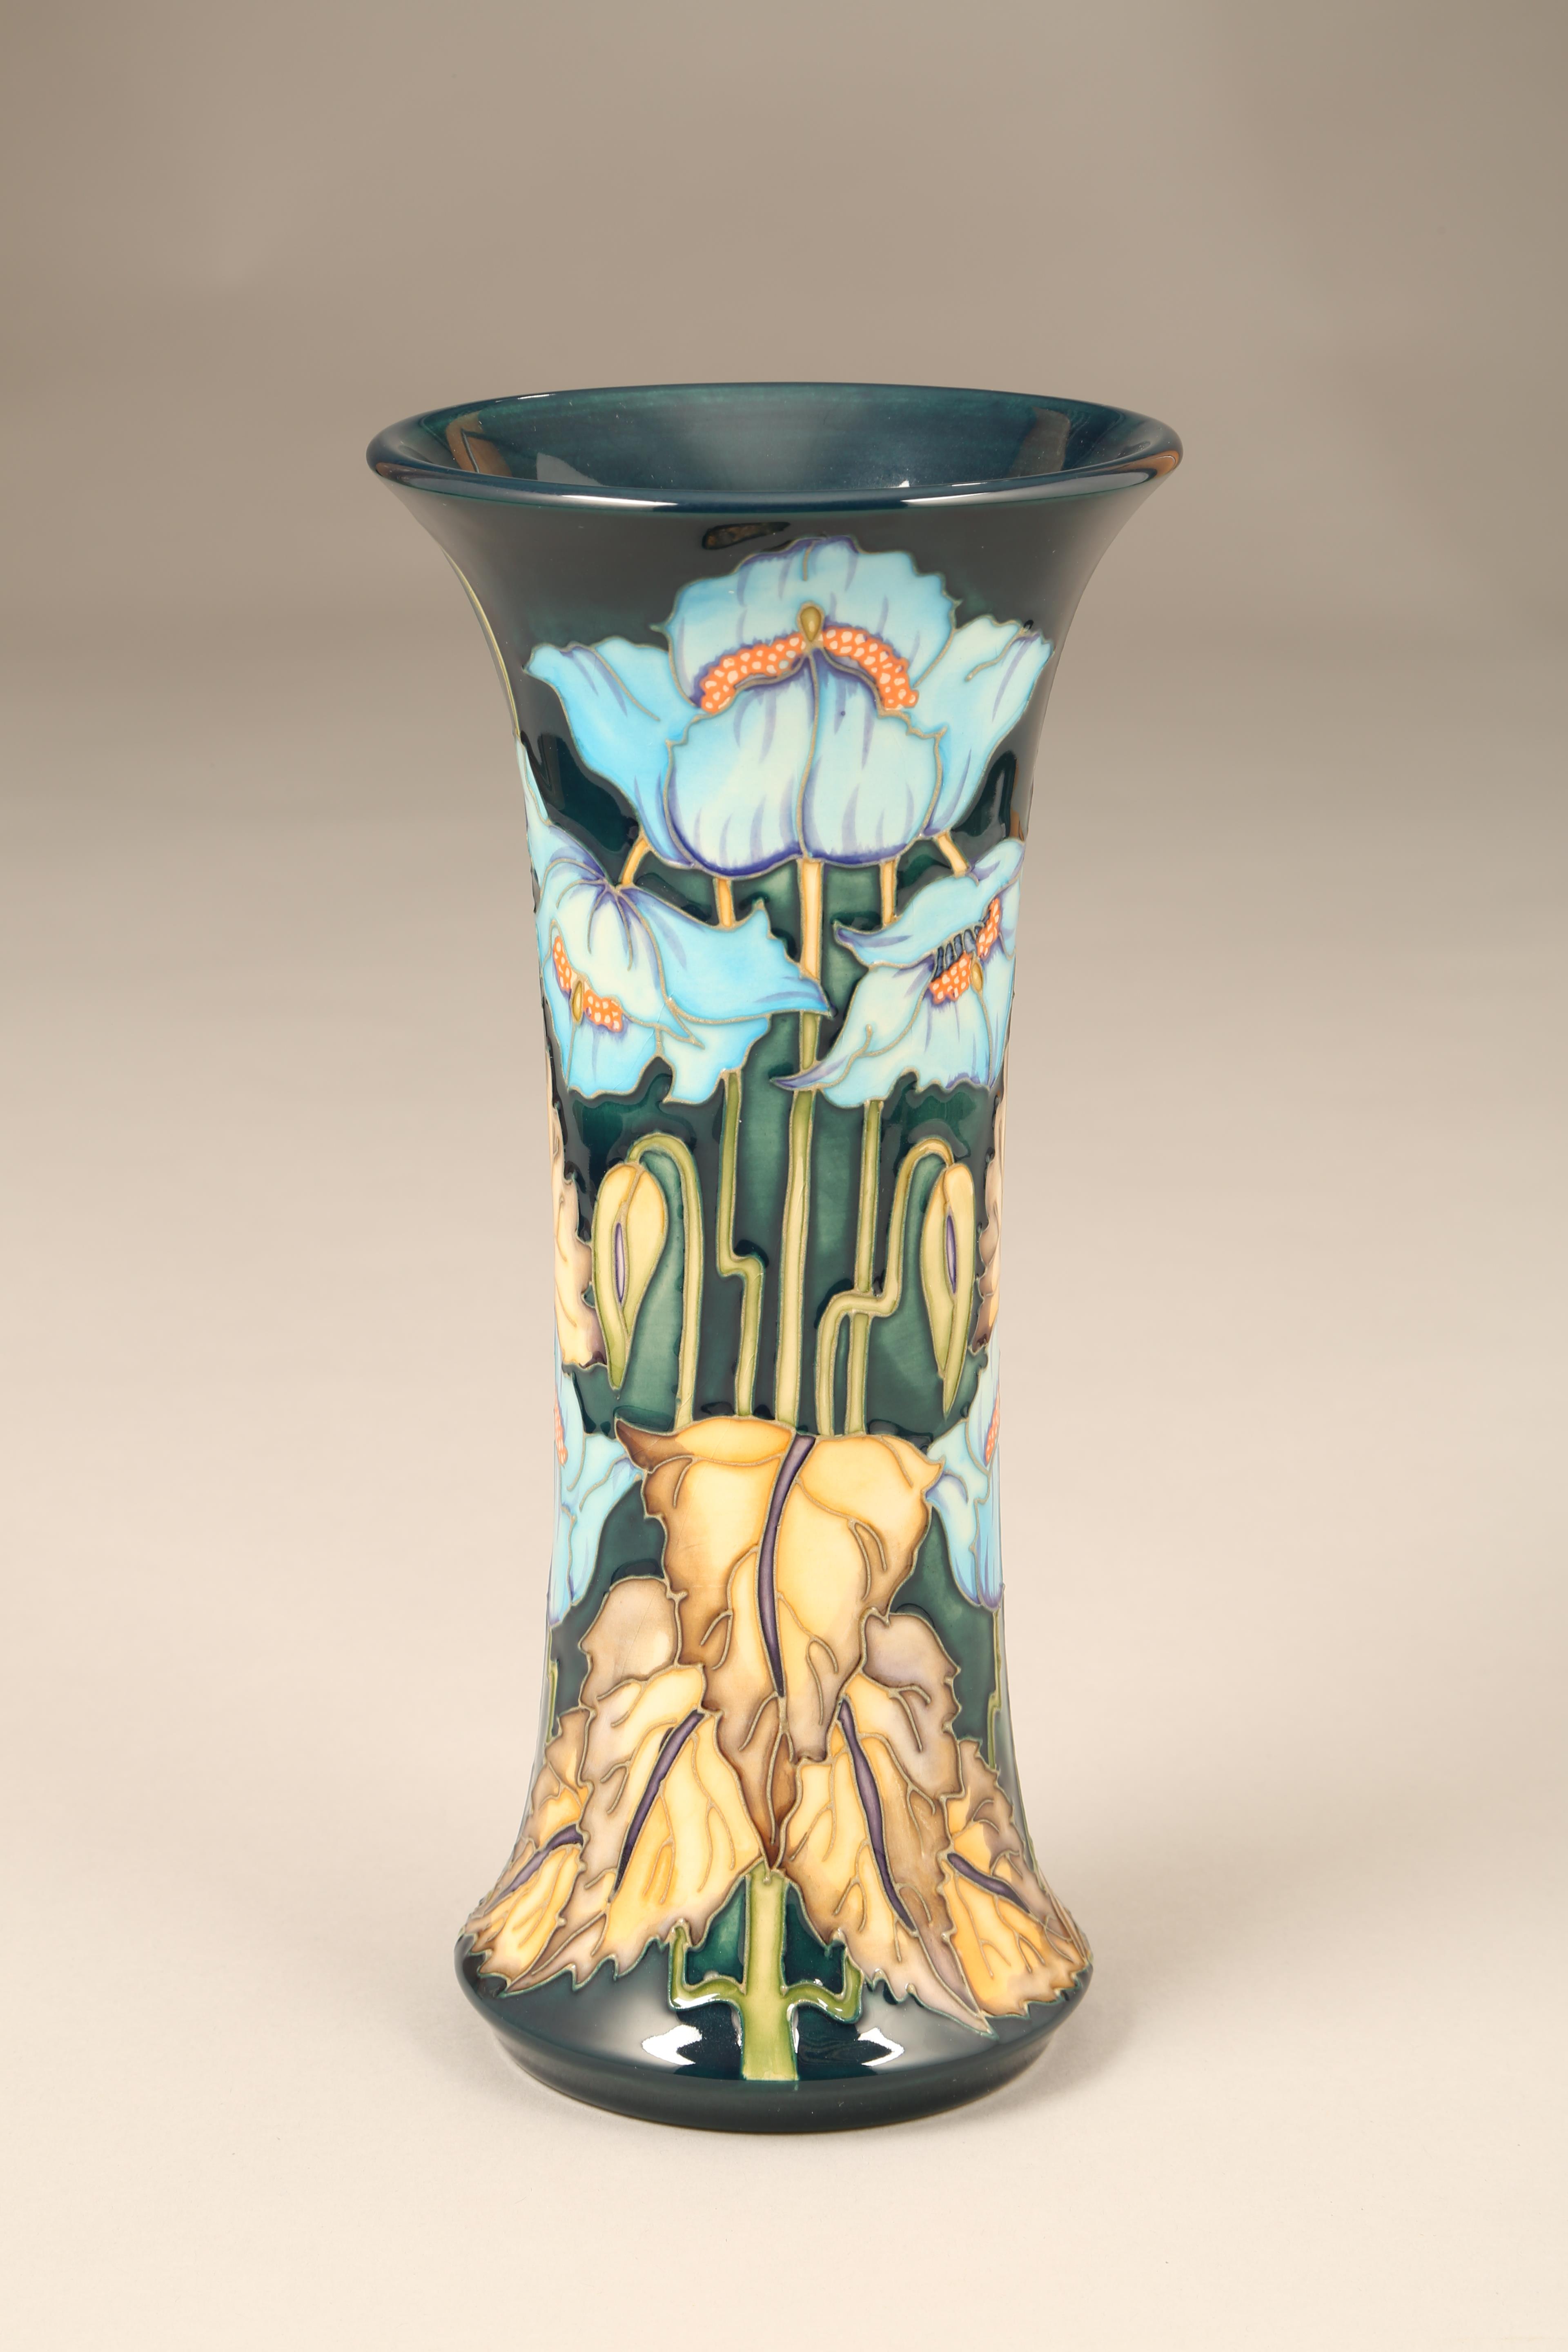 Moorcroft vase, 'Blue Rhapsody' No 807 designed and signed by Philip Gibson dated 2001 made for